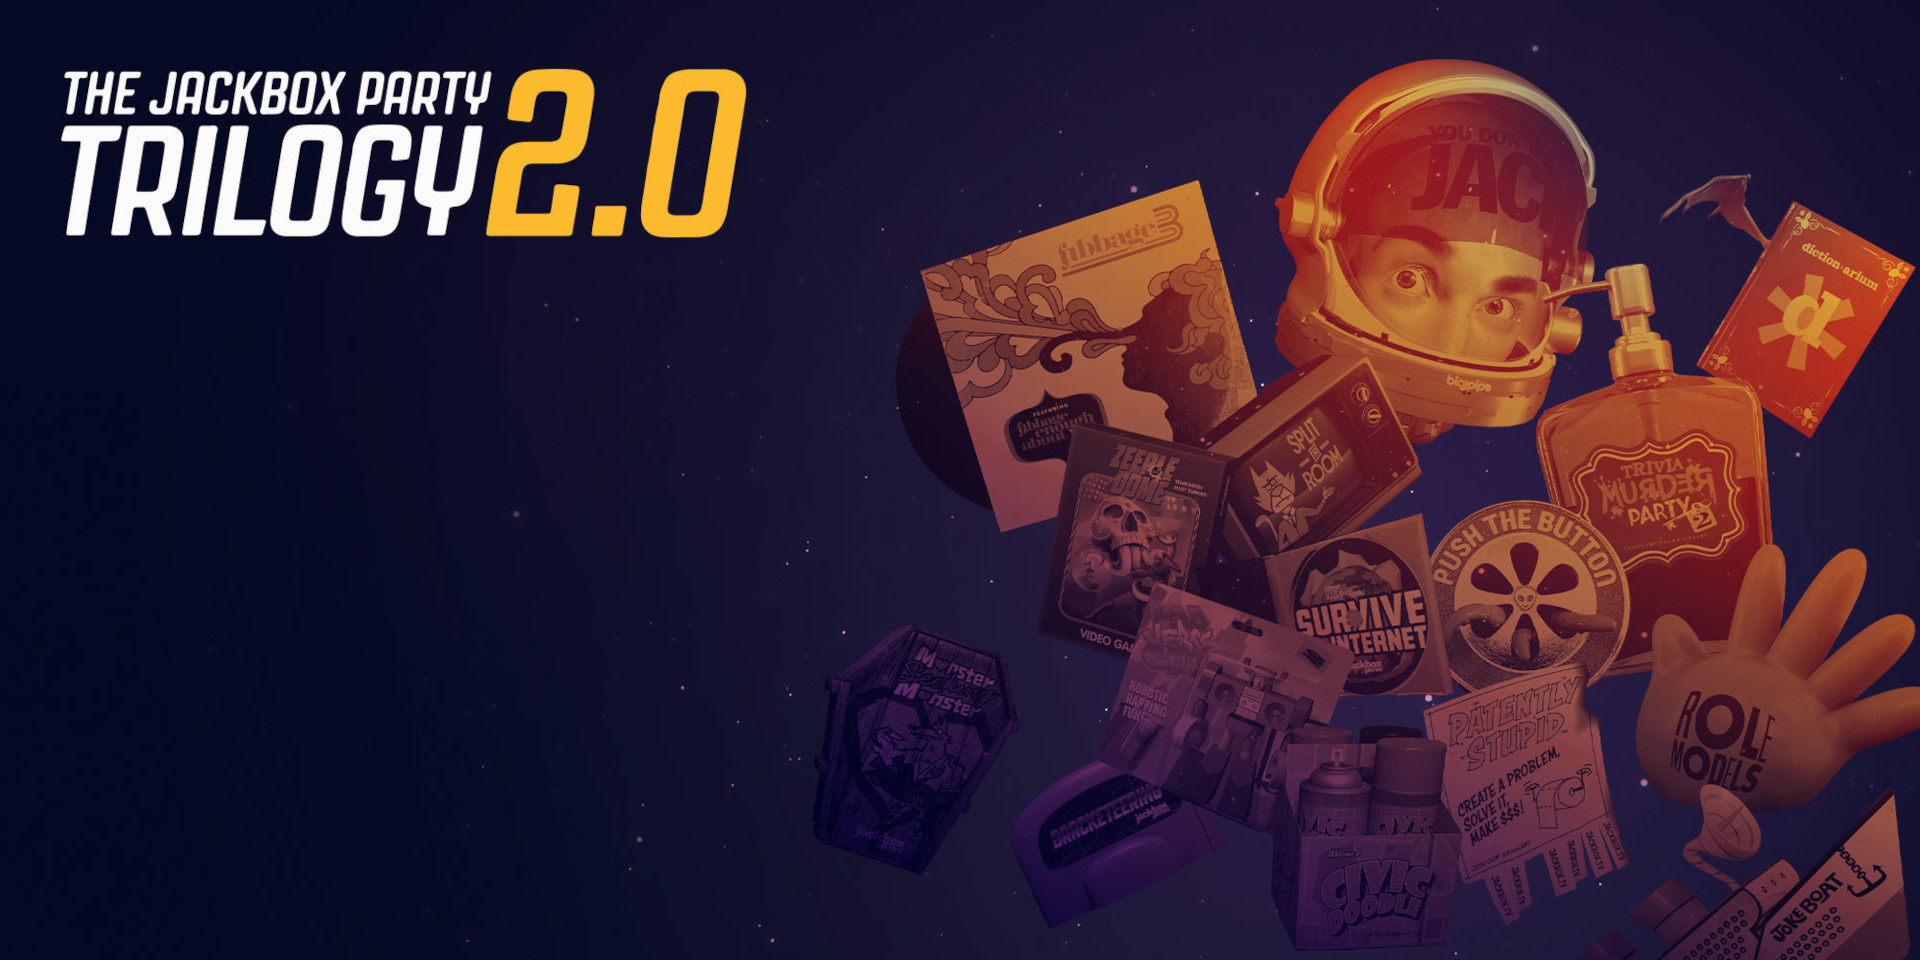 The Jackbox Party Pack Trilogy 2.0 Steam CD Key 47.83$